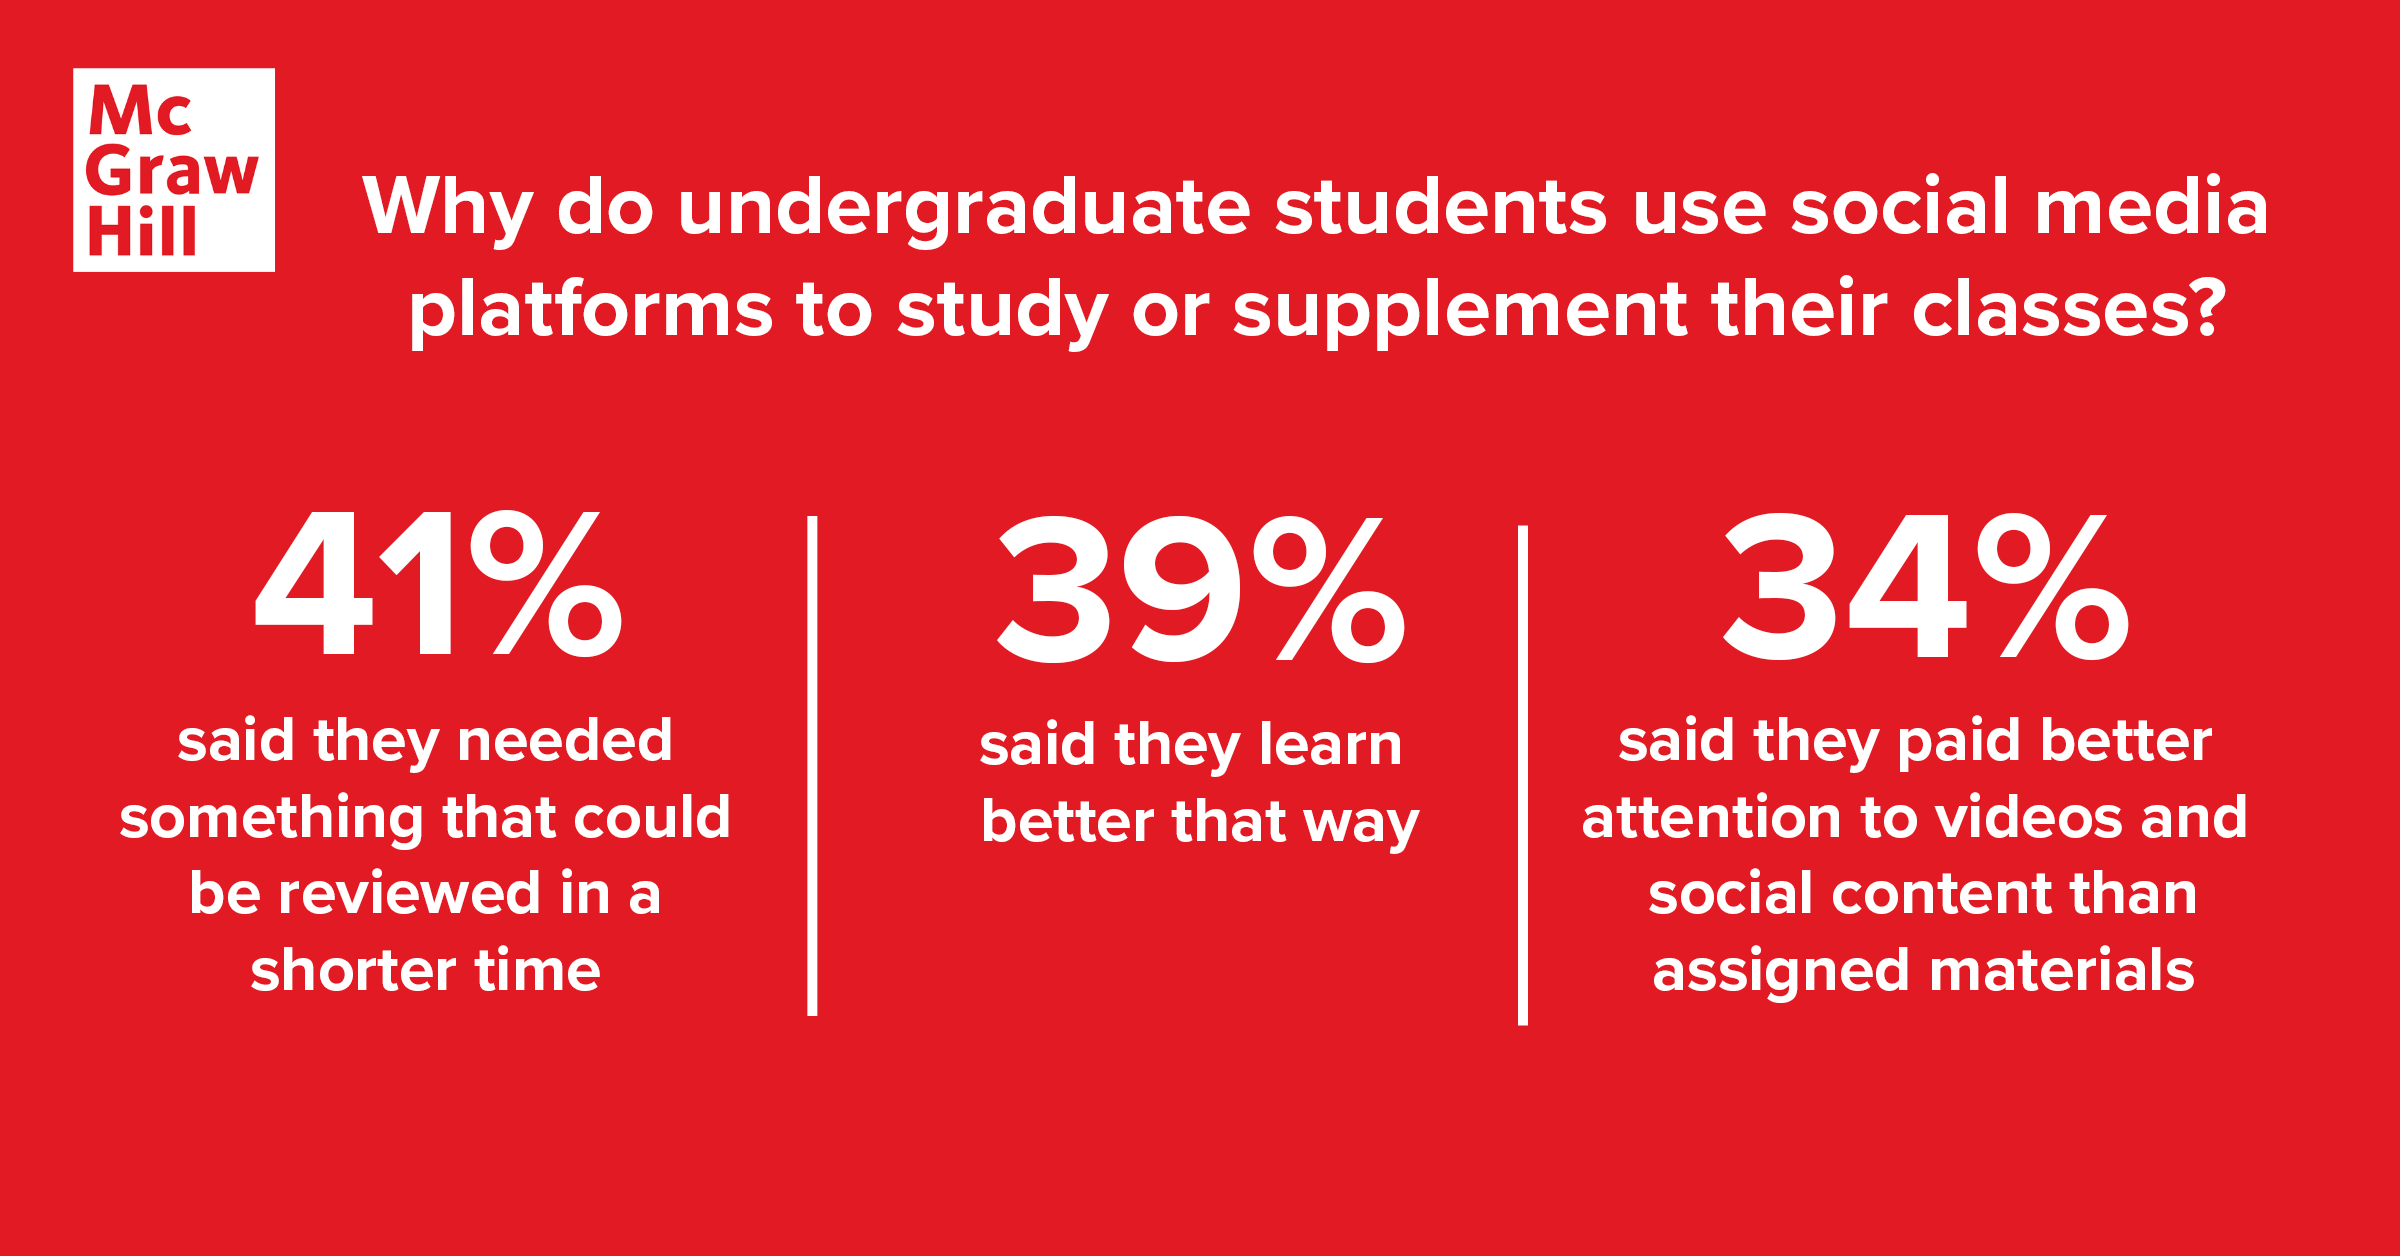 78% of undergraduate students used social media to study or find content related to their classes